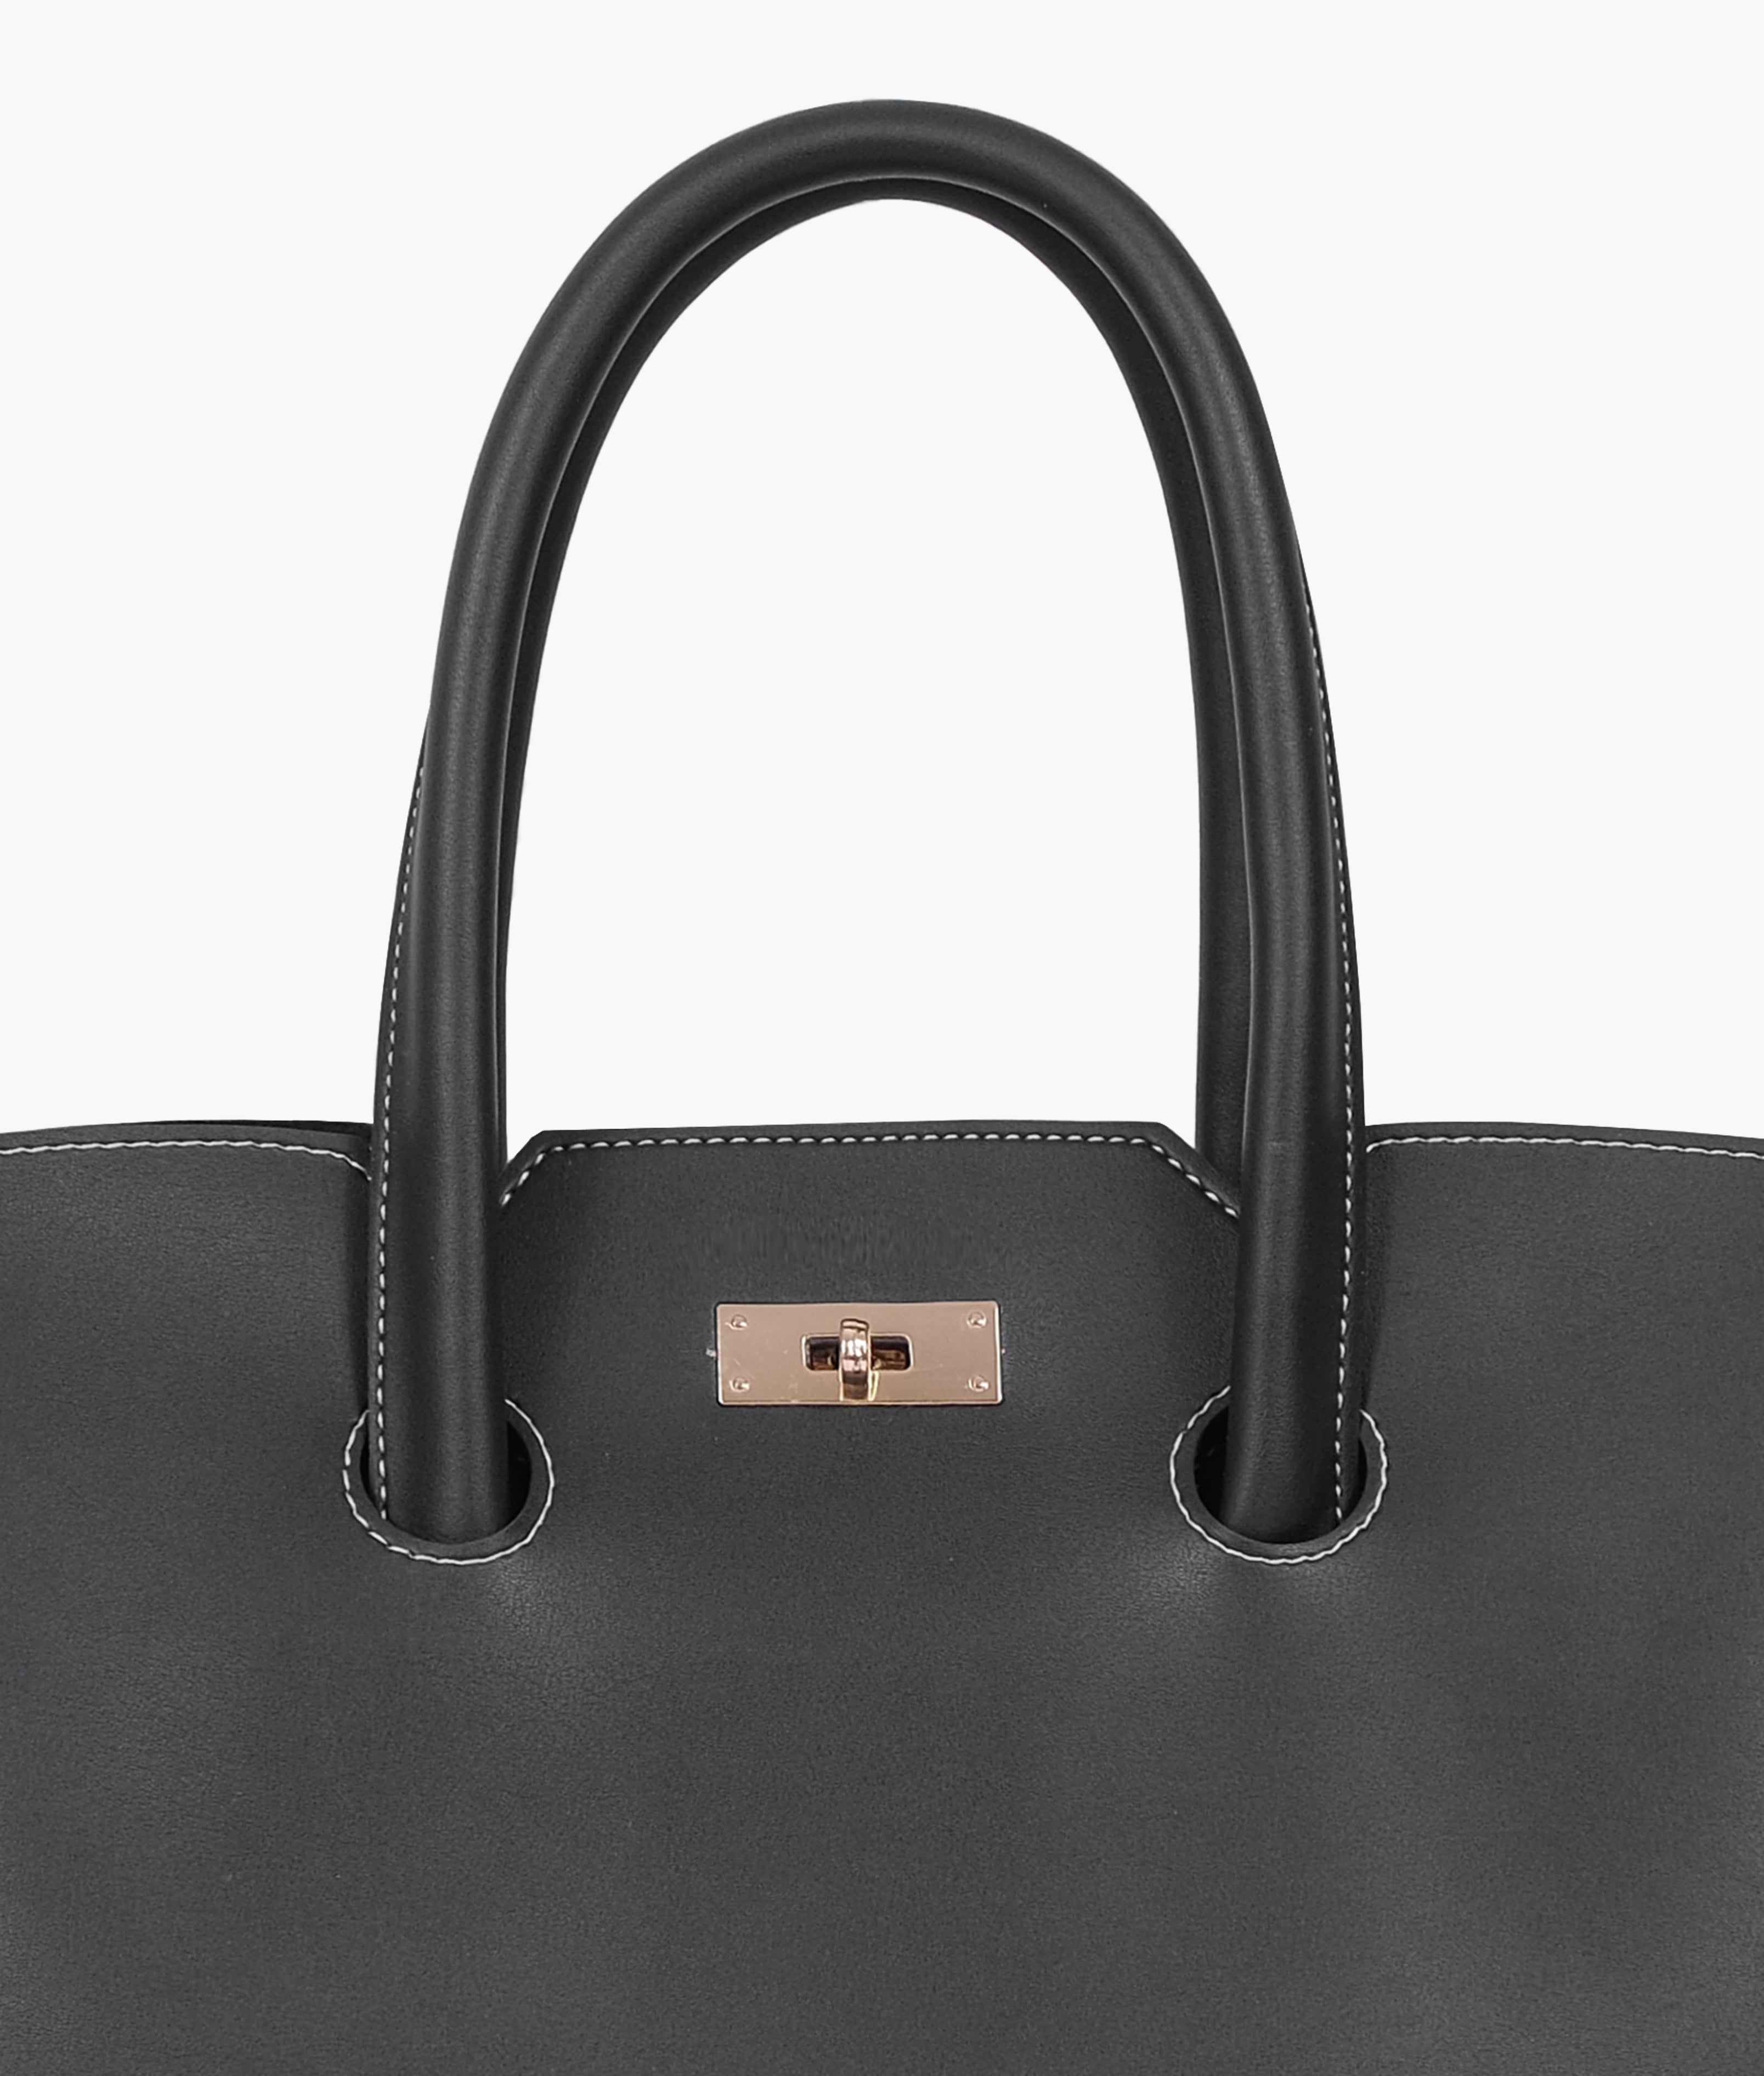 Black tote bag with multiple compartments